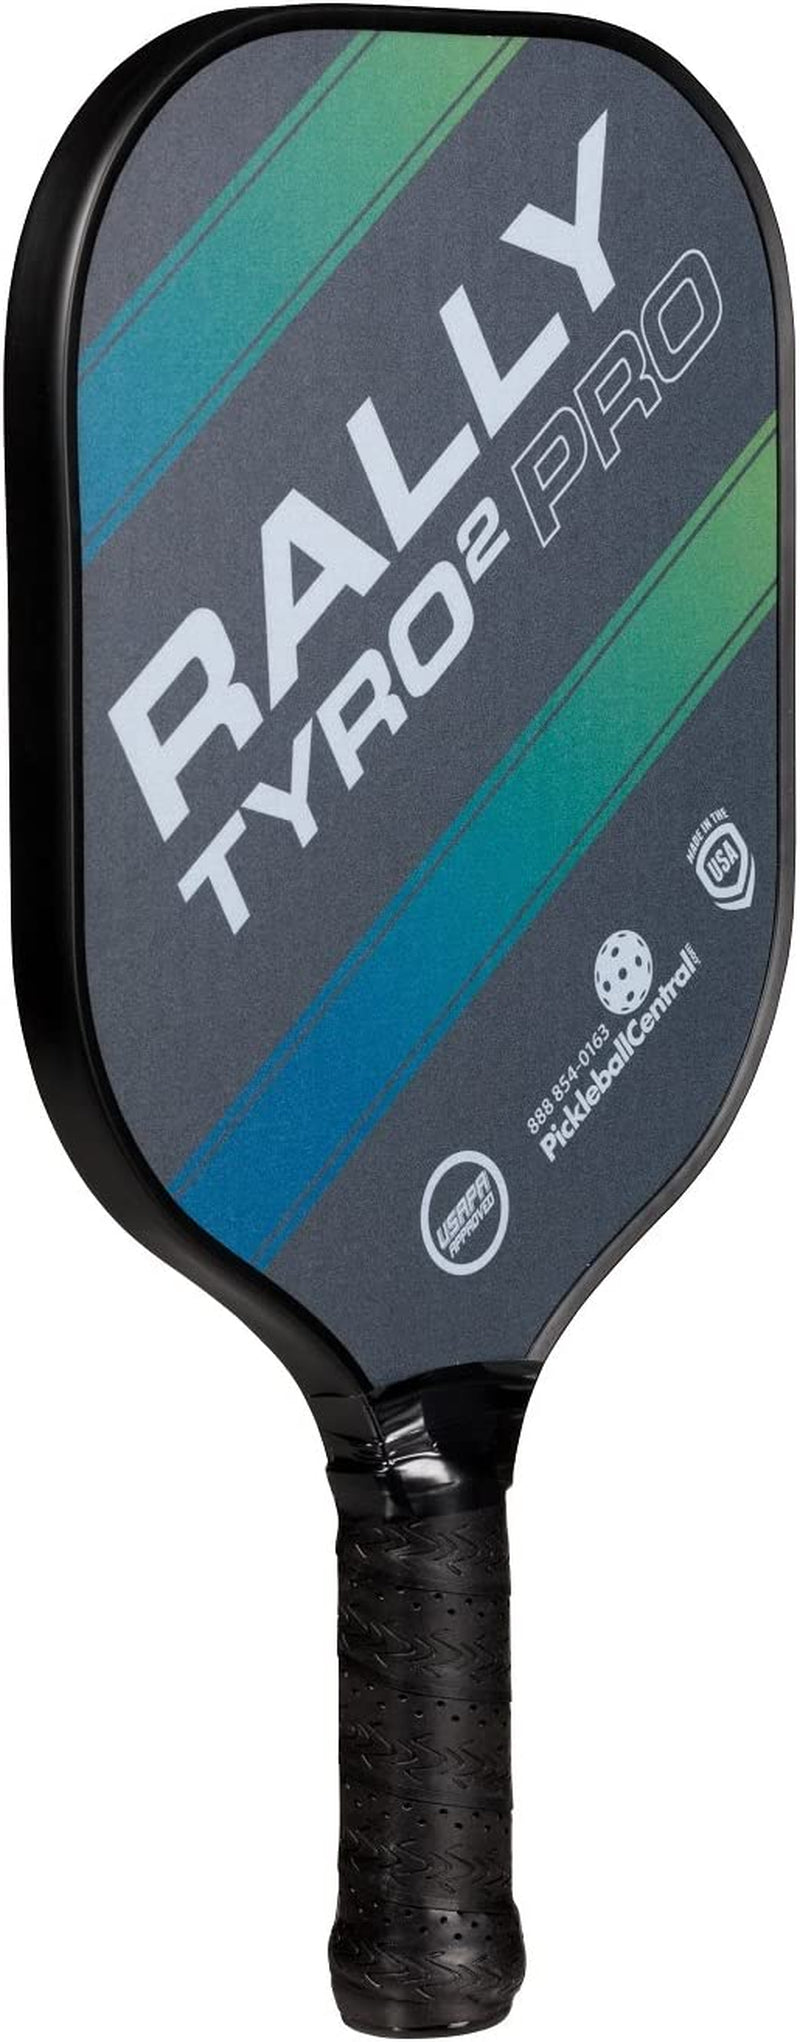 "Unleash Your Inner Champion with the Power-Packed Ultimate Rally Tyro 2 Pro Pickleball Paddle!"